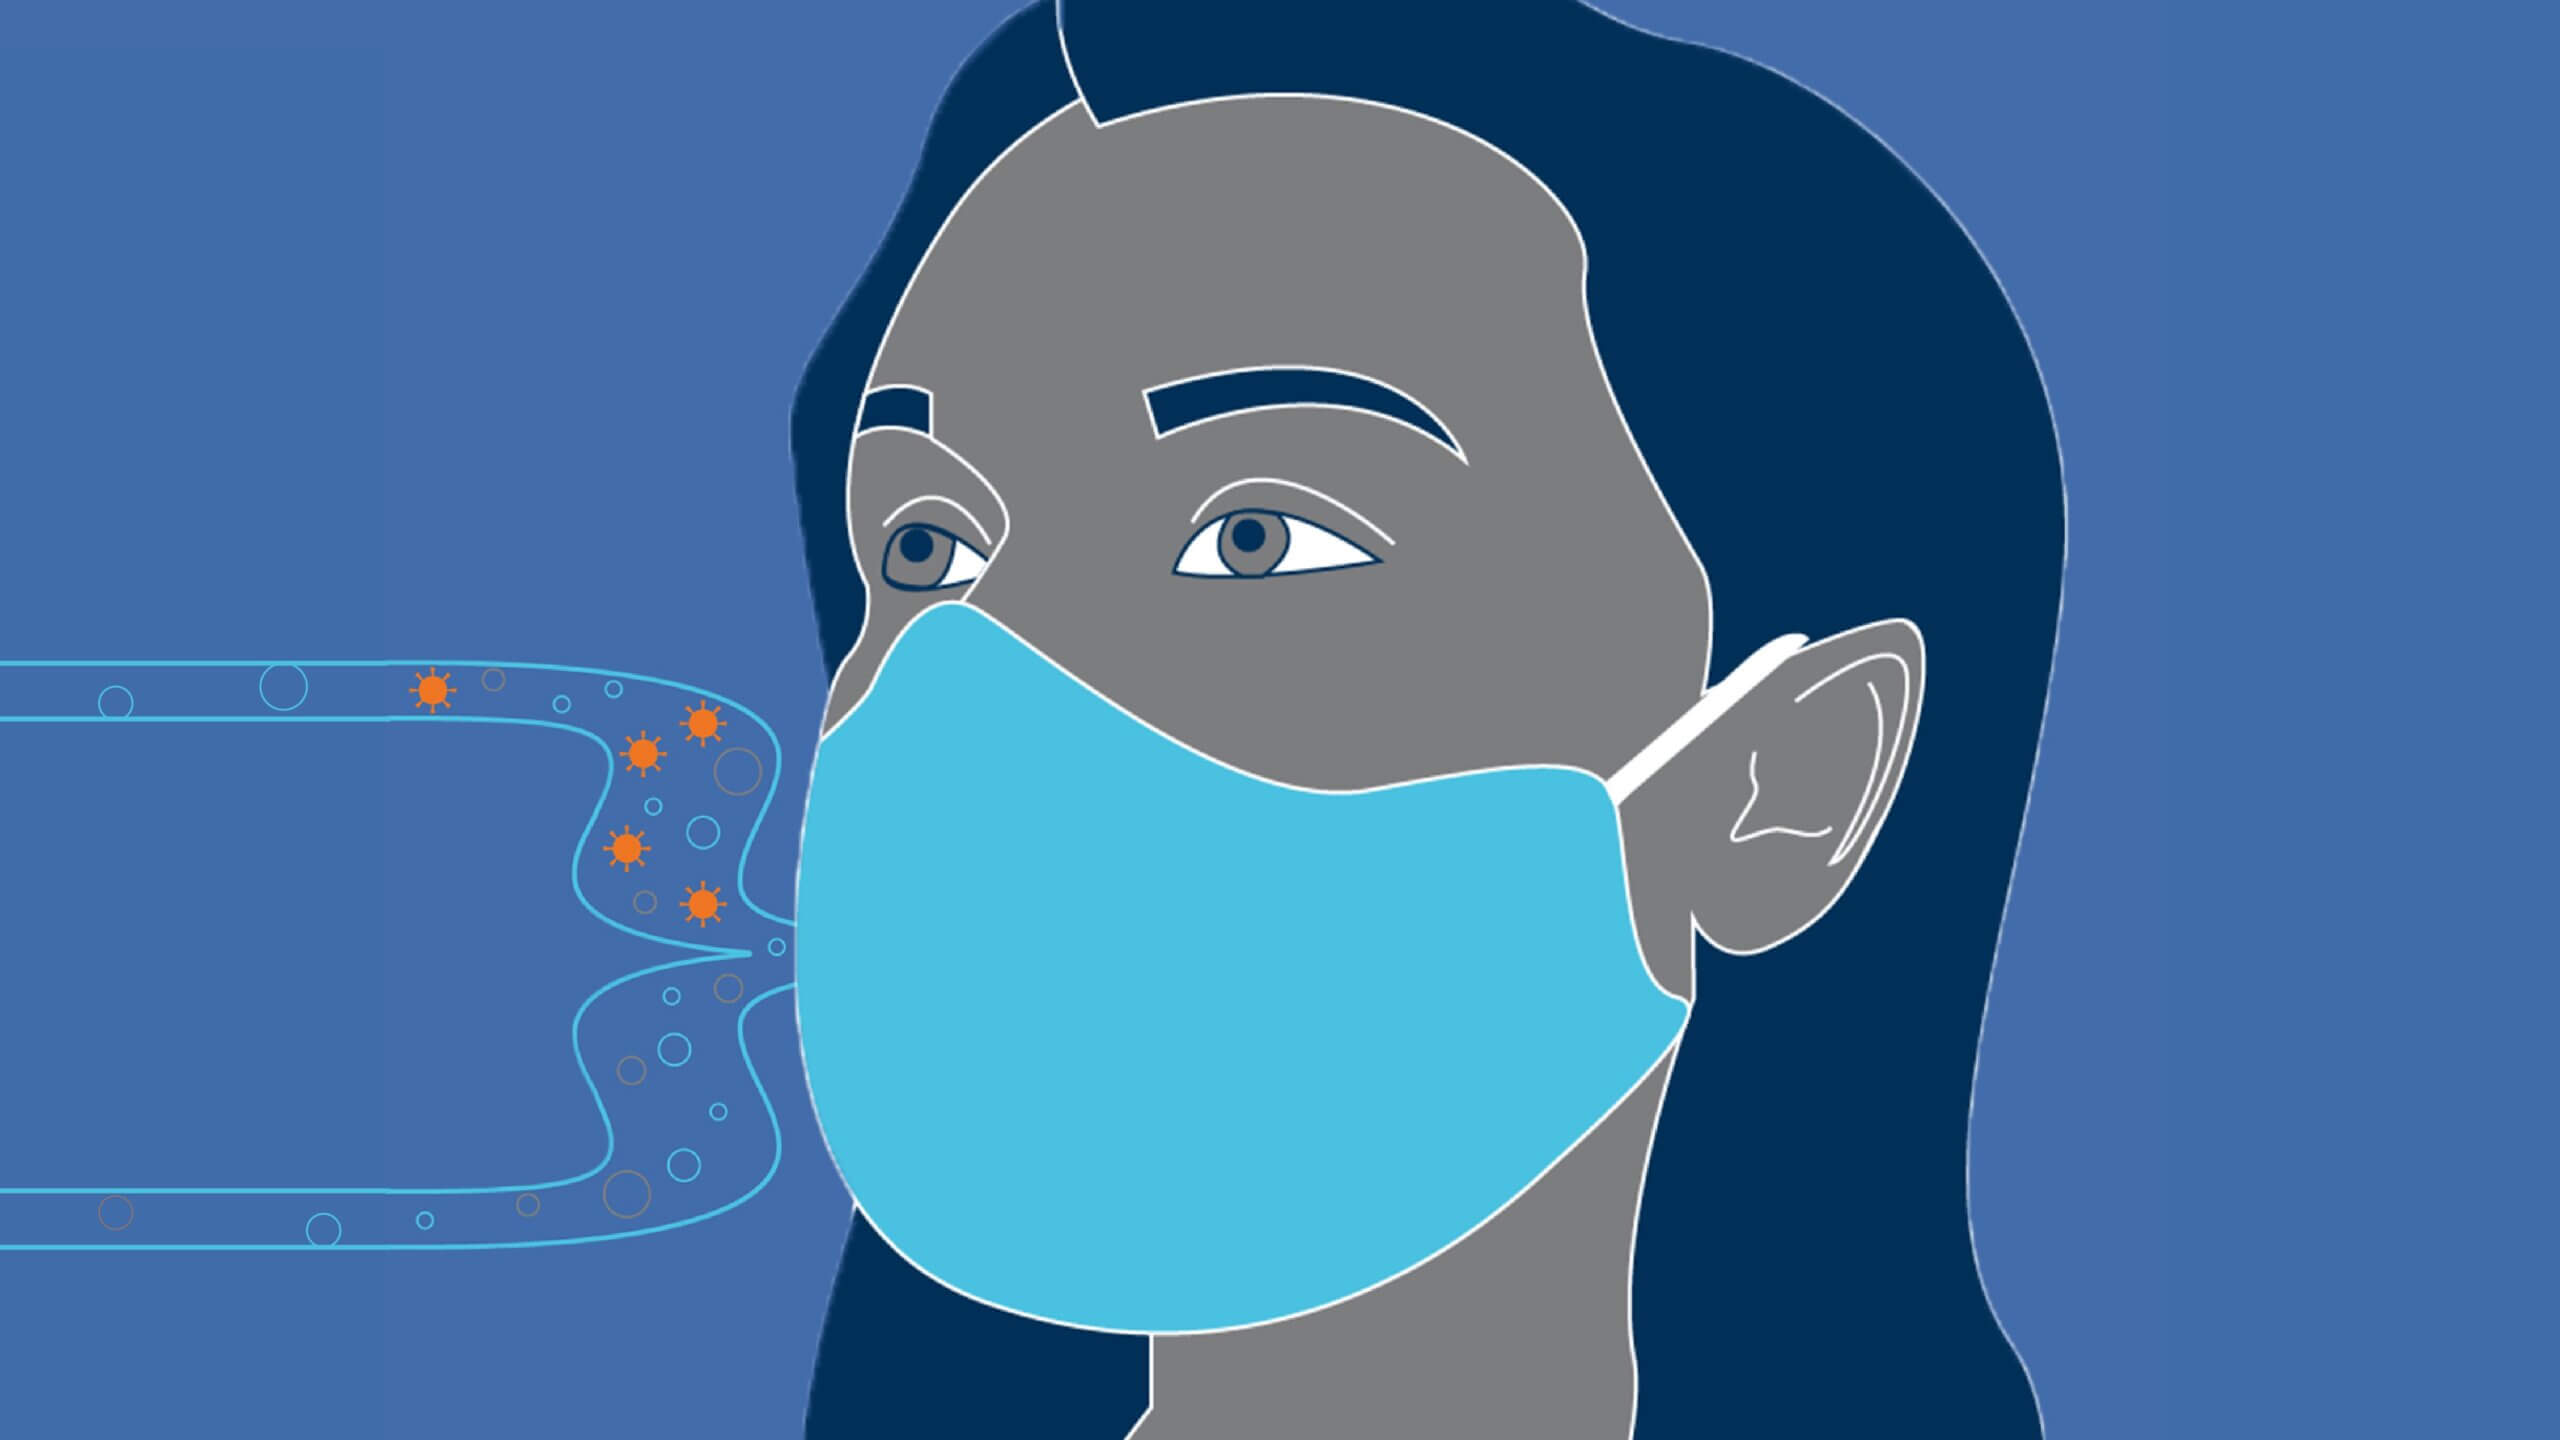 illustration showing a person wearing a mask with two streams coming out. One stream has viruses, and the other does not.